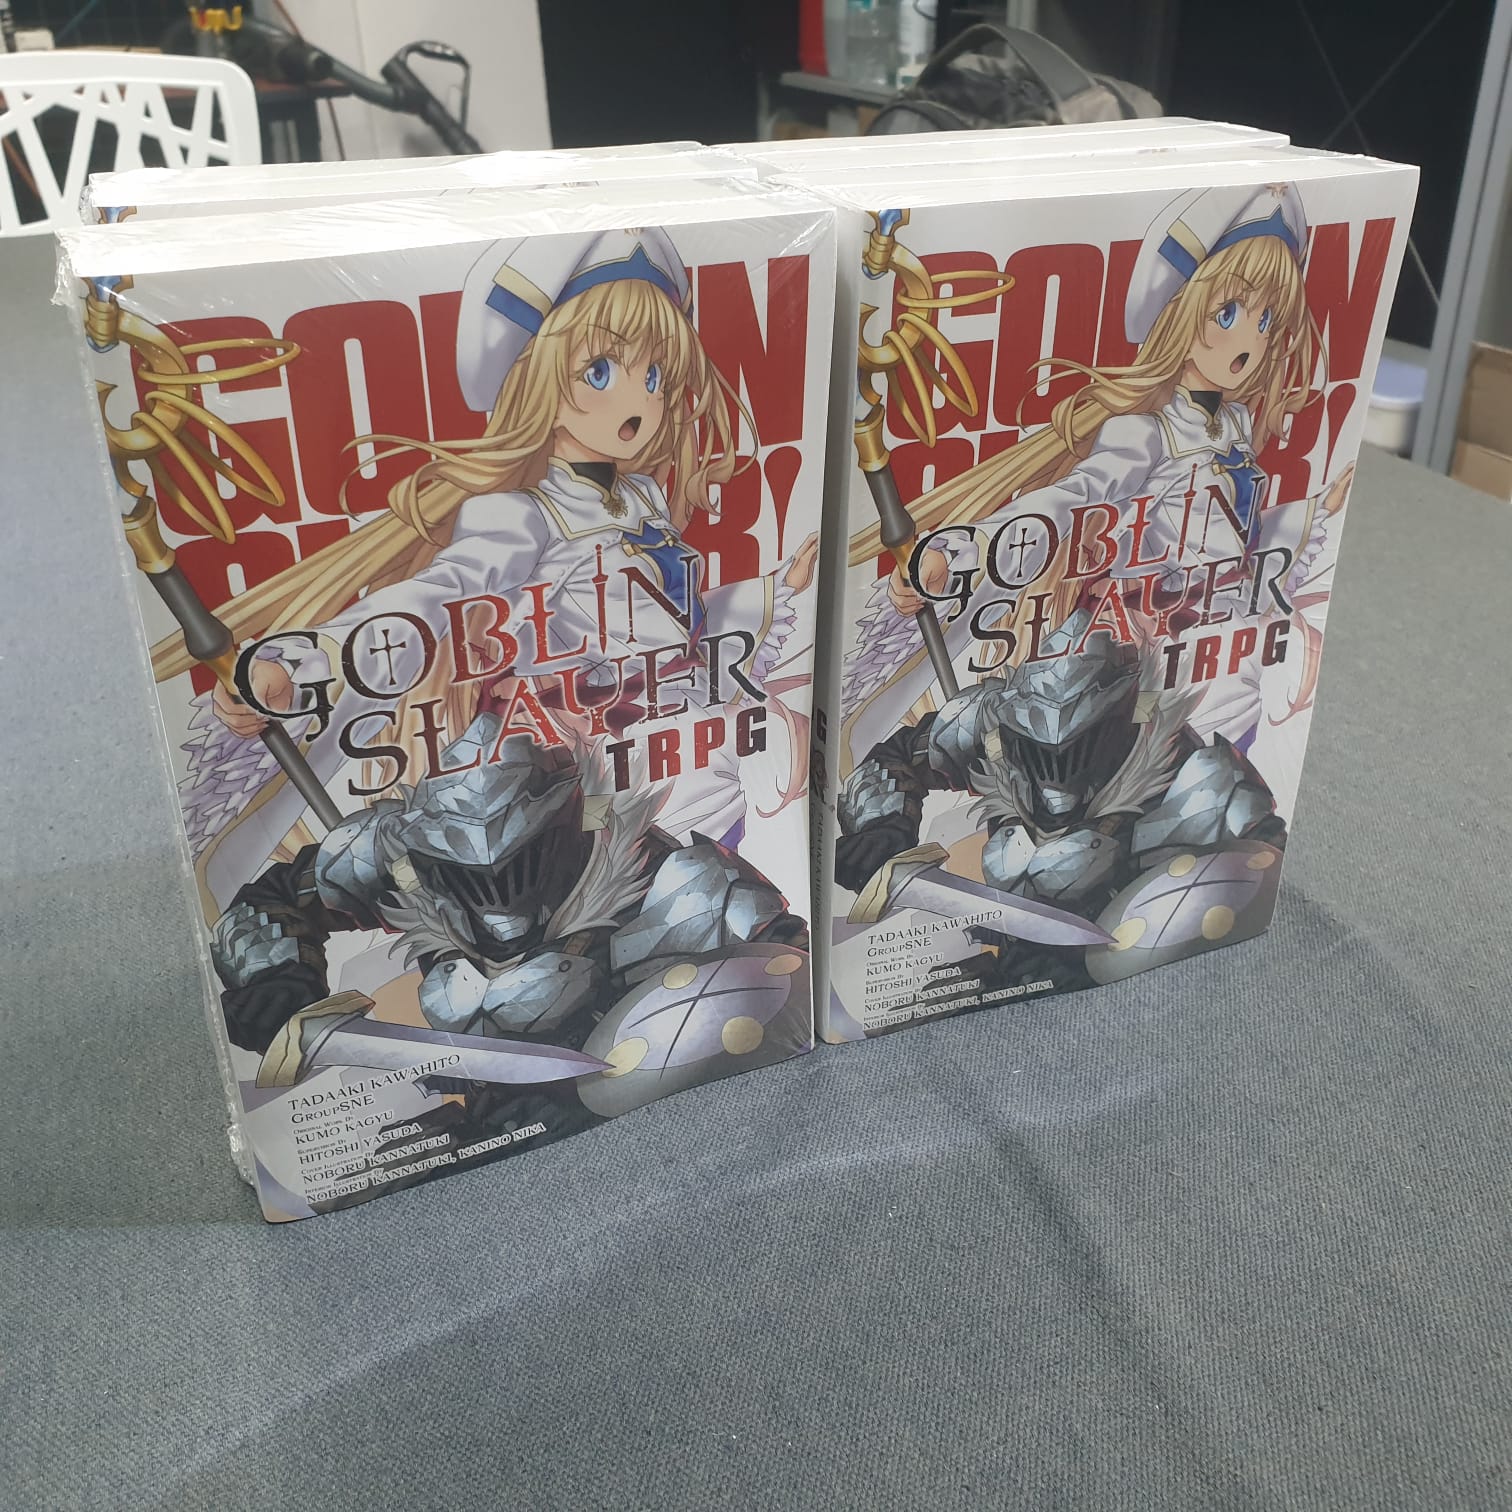 Goblin Slayer Tabletop Roleplaying Game